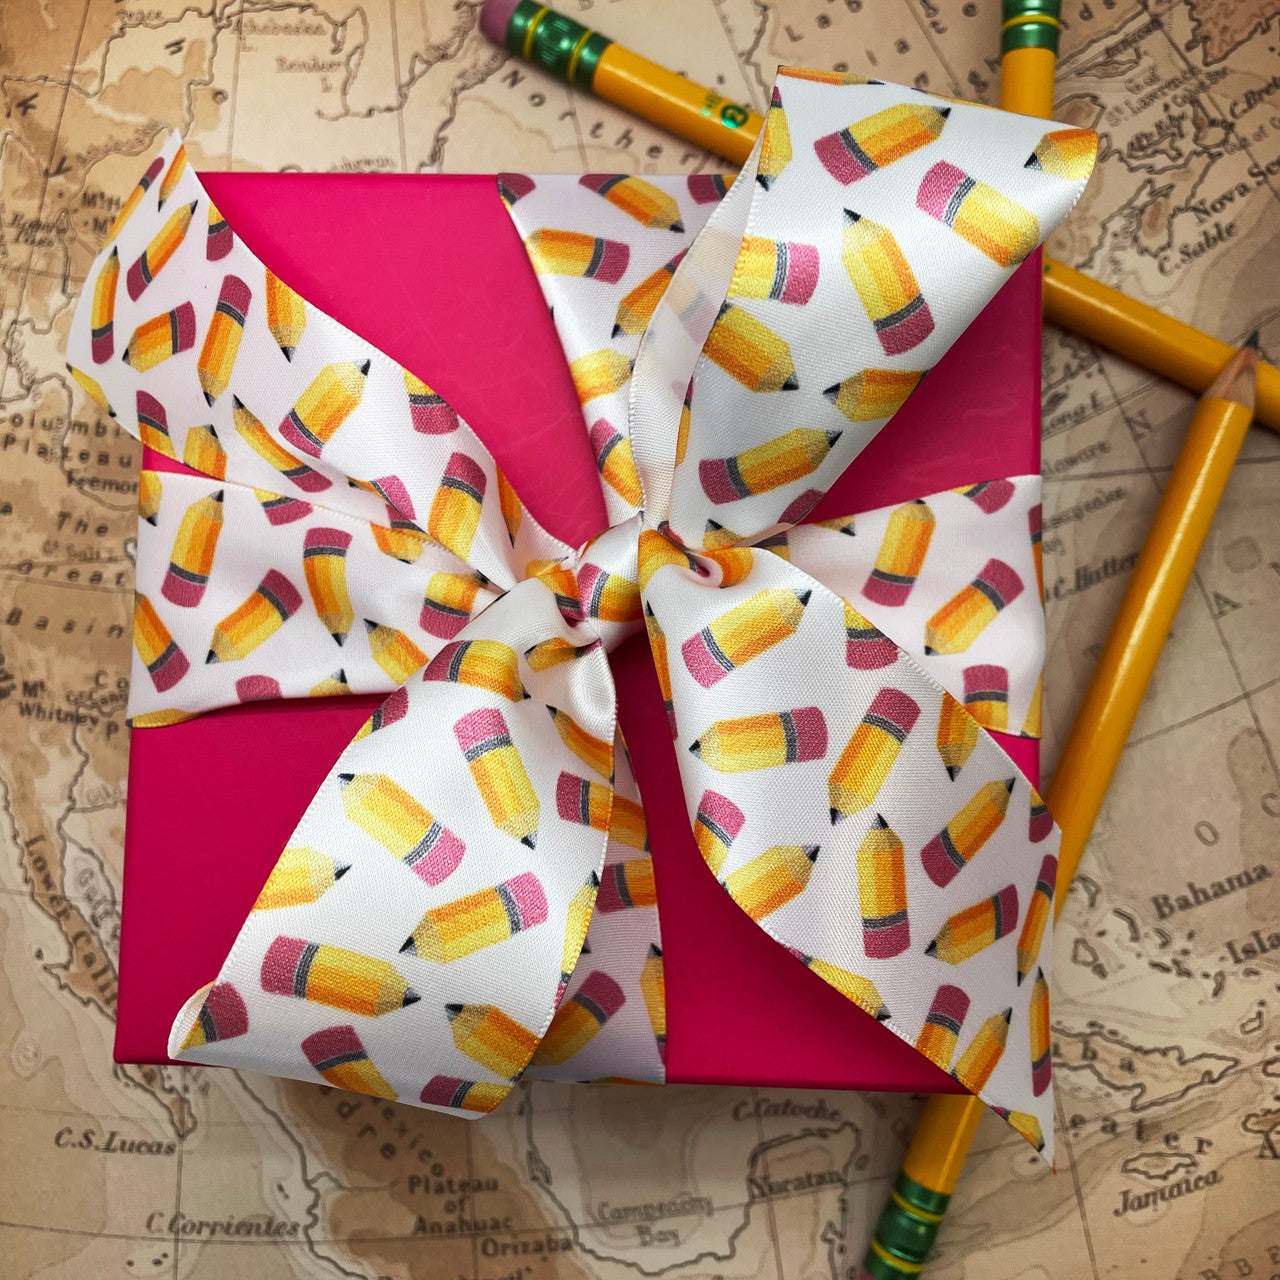 Tie a beautiful bow on the perfect package for your teacher!